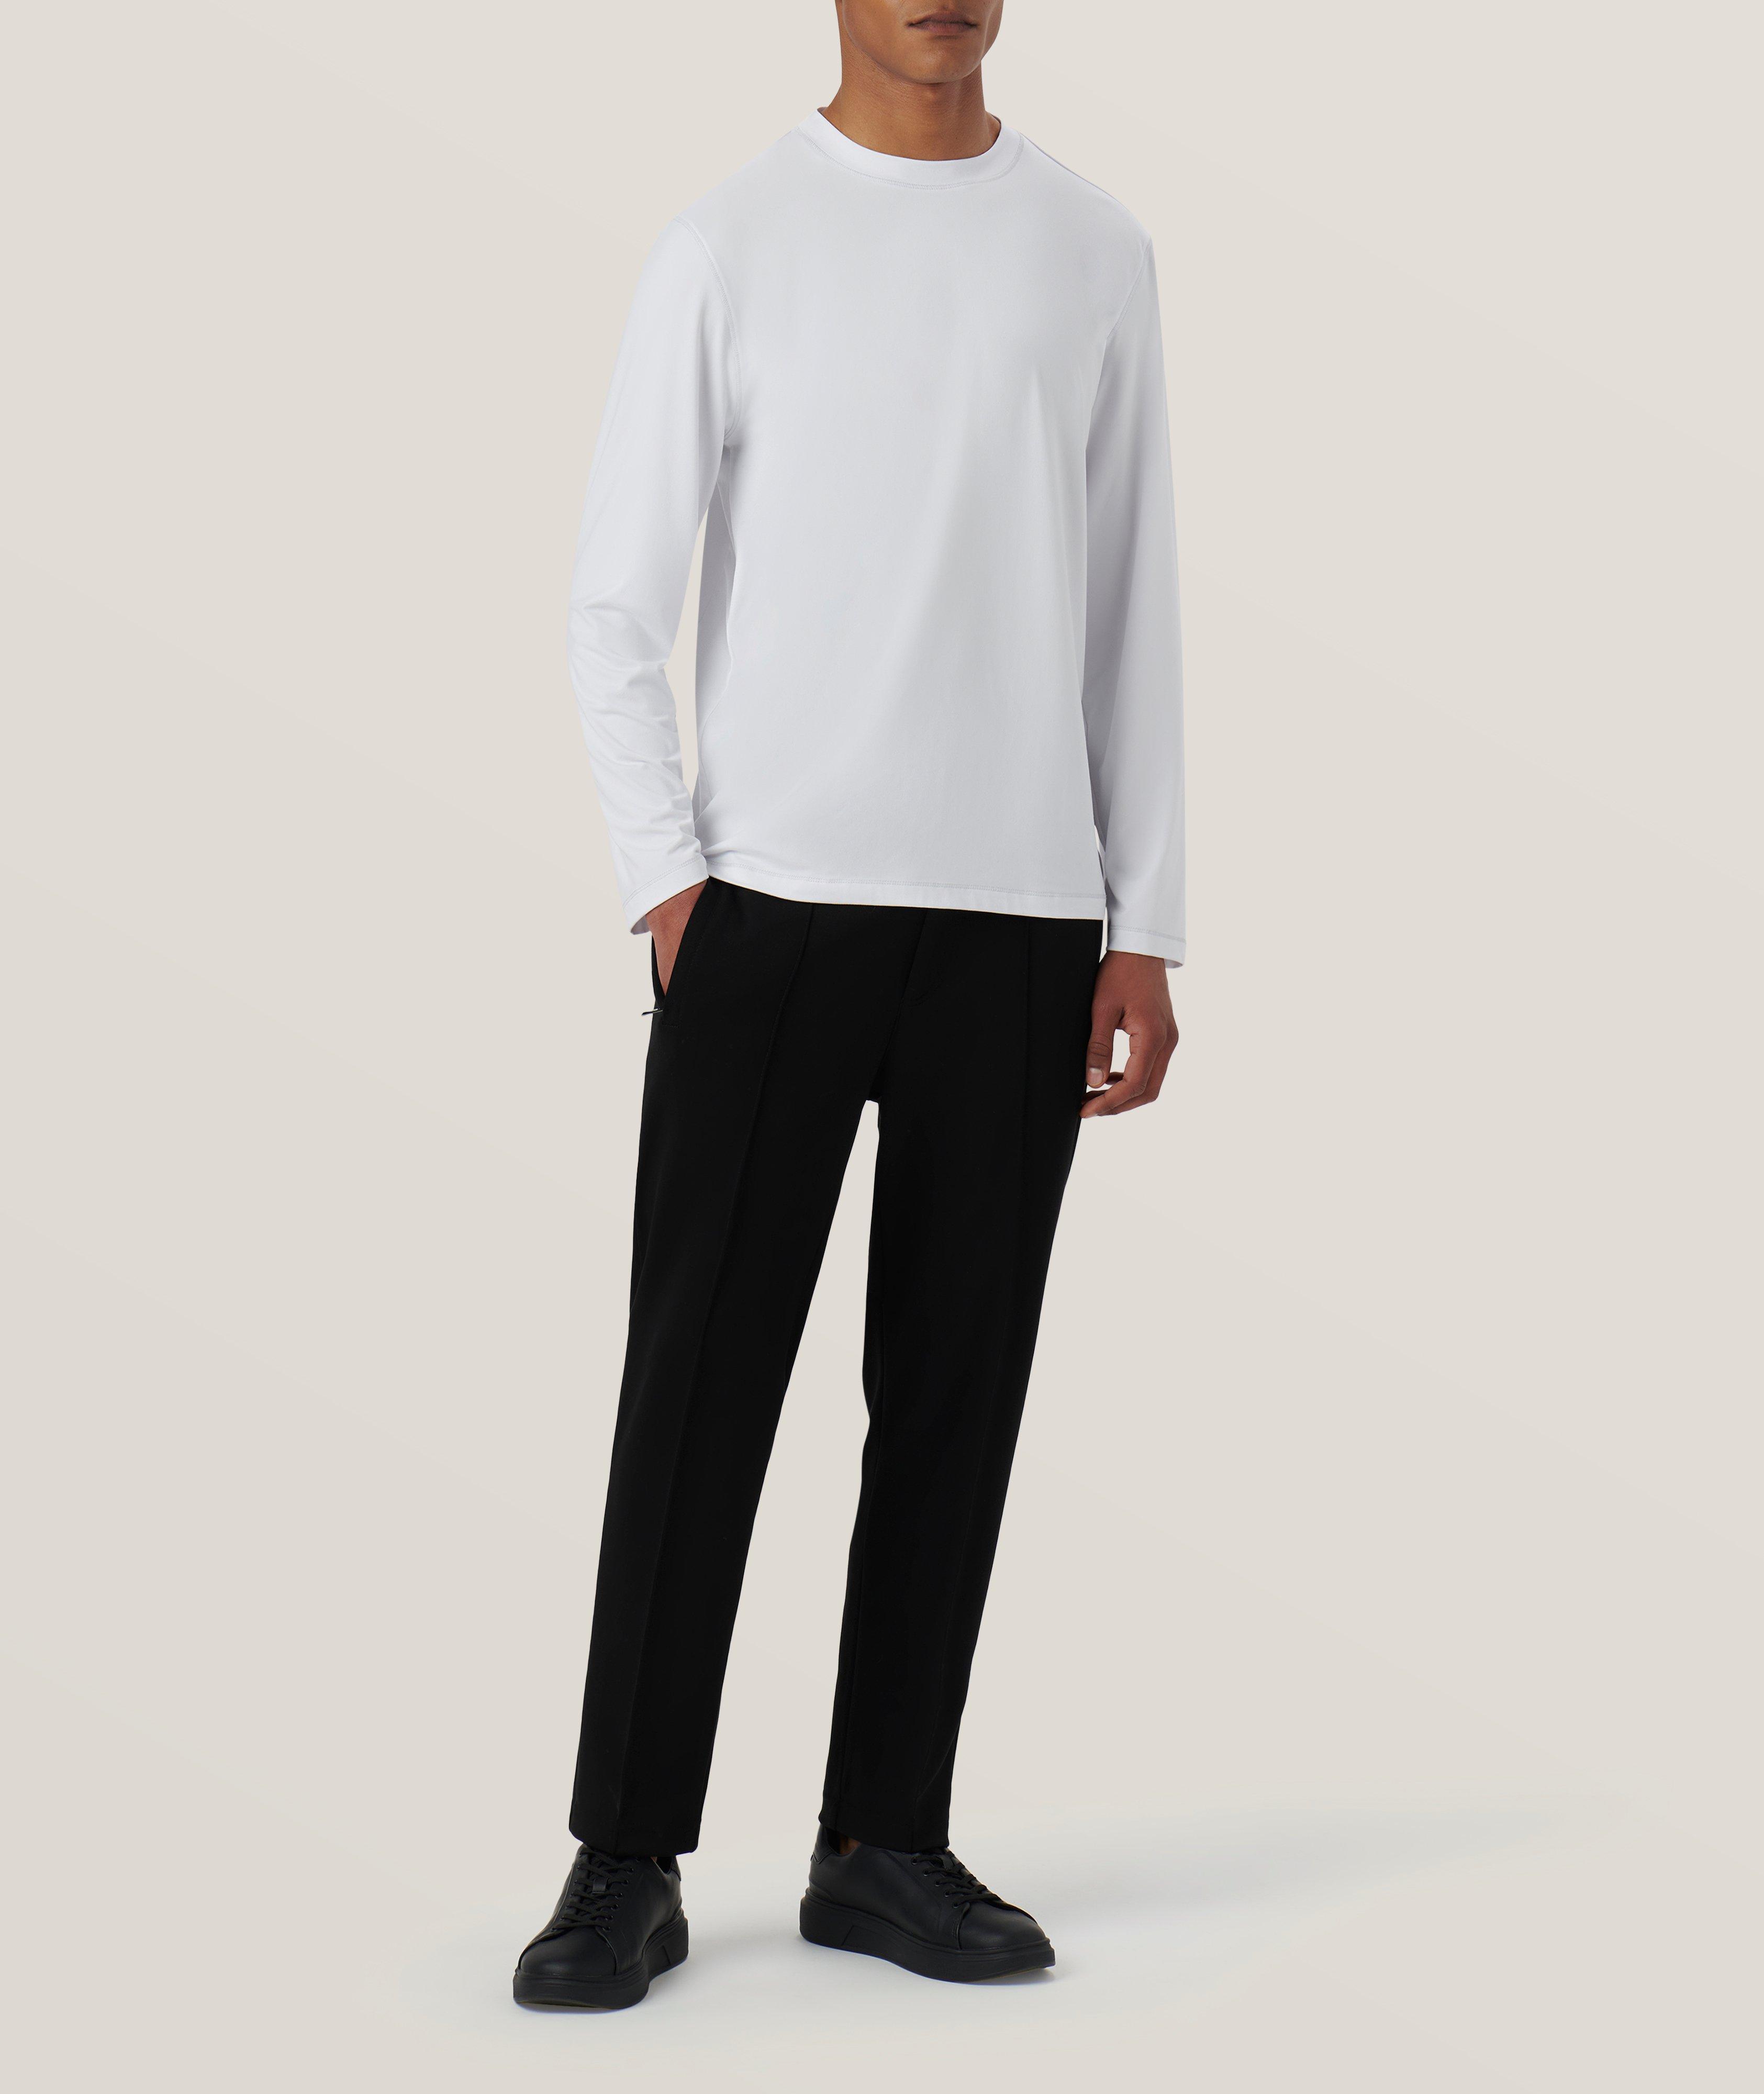 4-Way Stretch UV50 Performance Pullover image 5